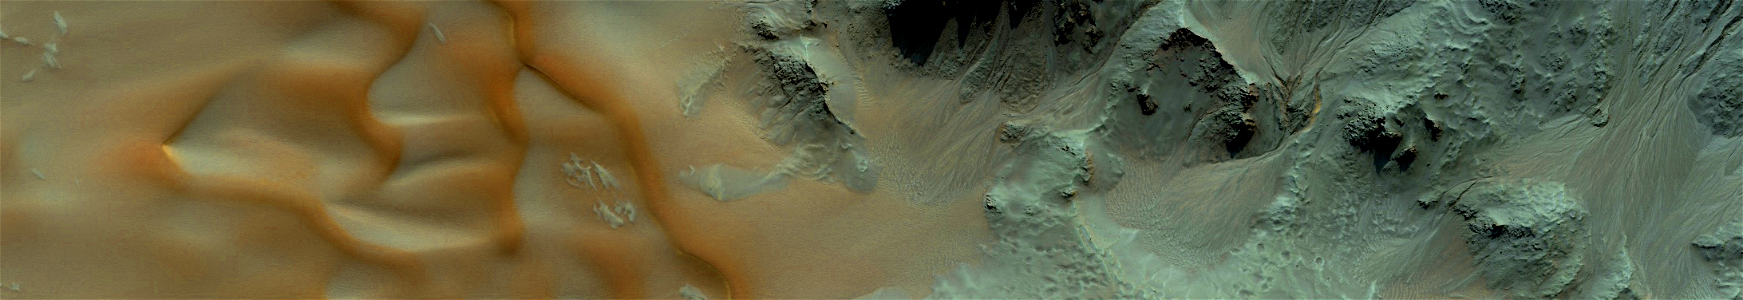 Mars - Gullies and Dunes in Hale Crater